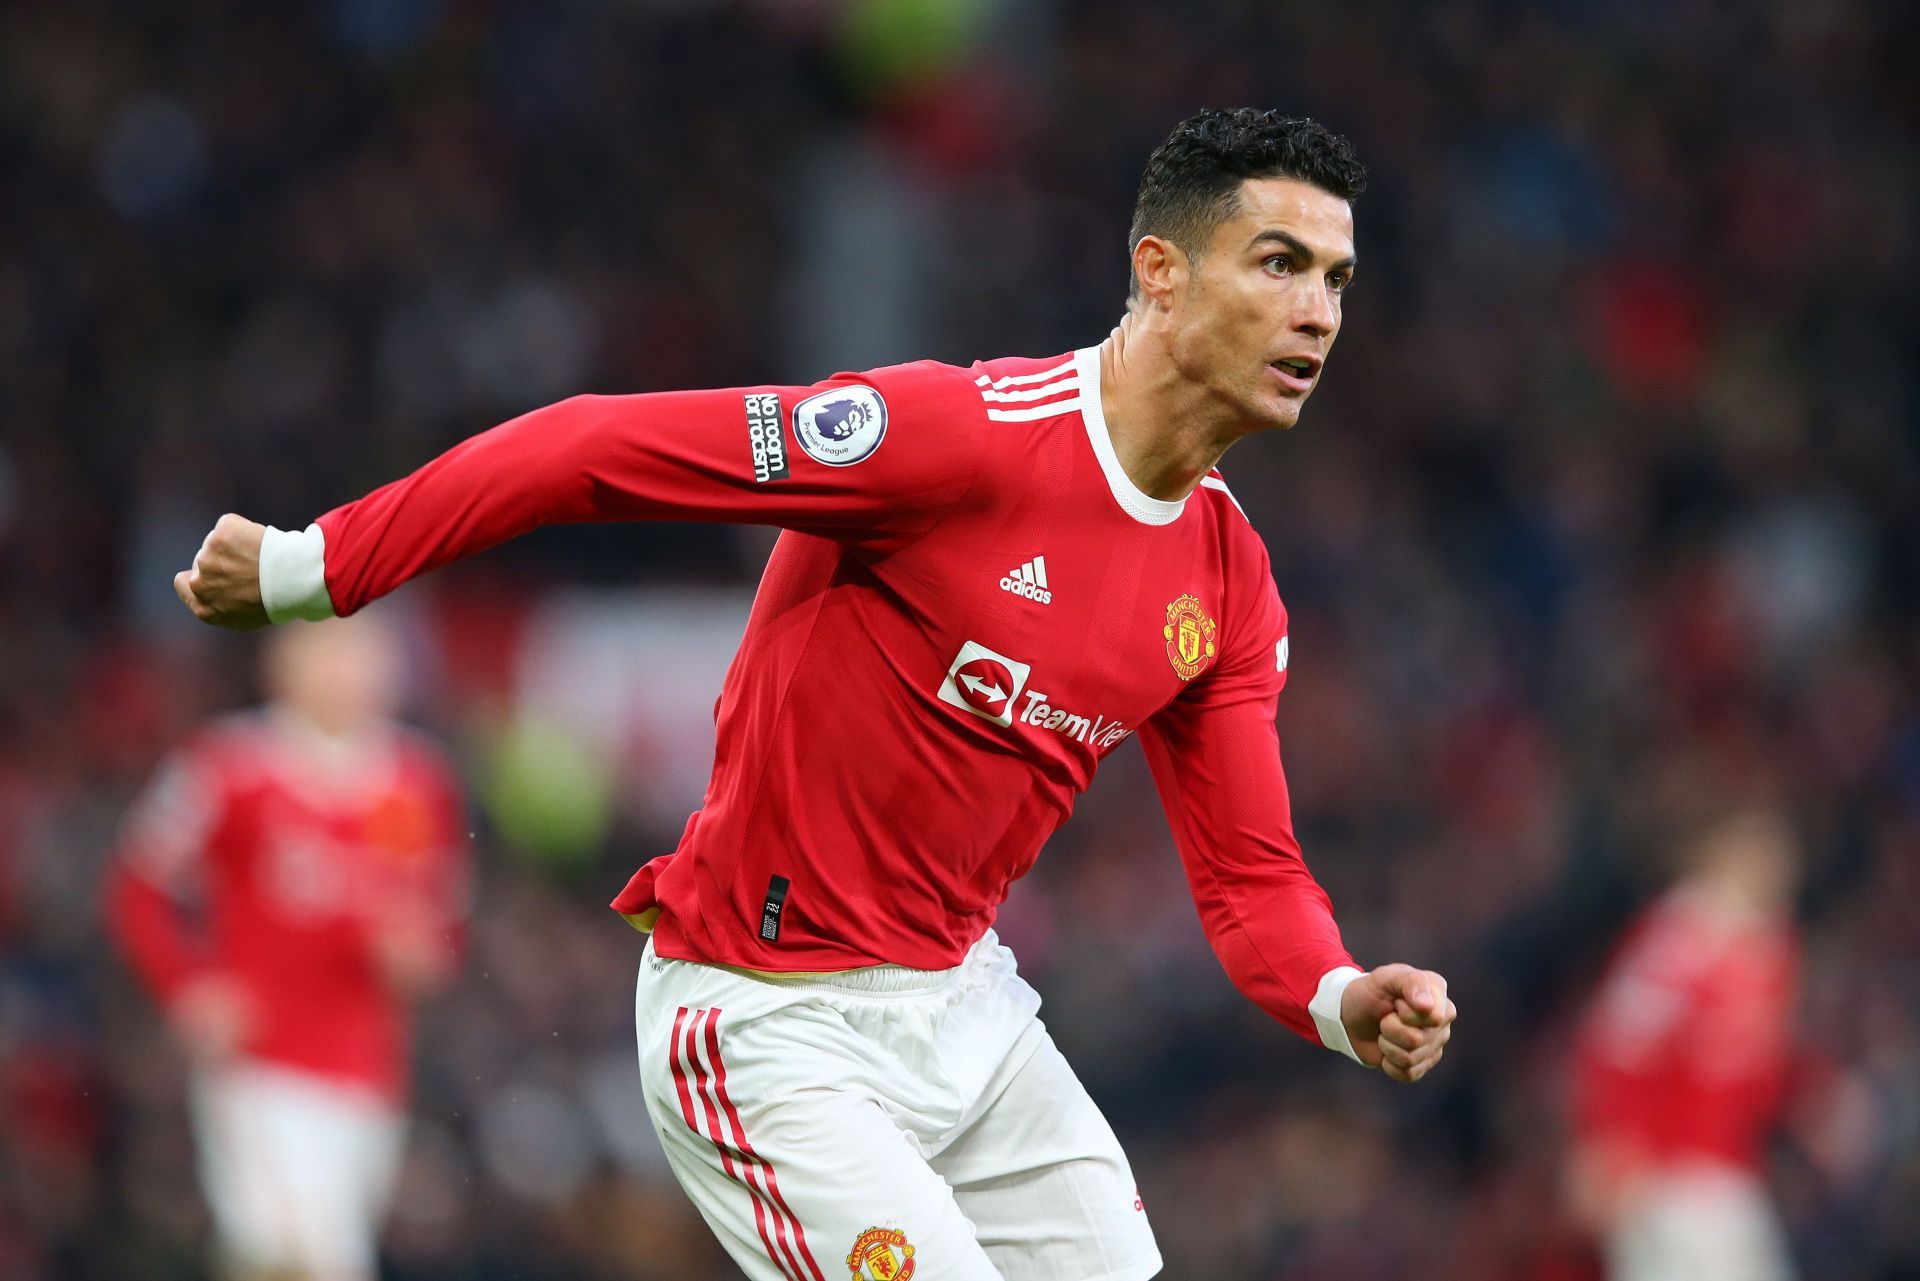 Manchester United forward Cristiano Ronaldo. (Photo by Alex Livesey/Getty Images)